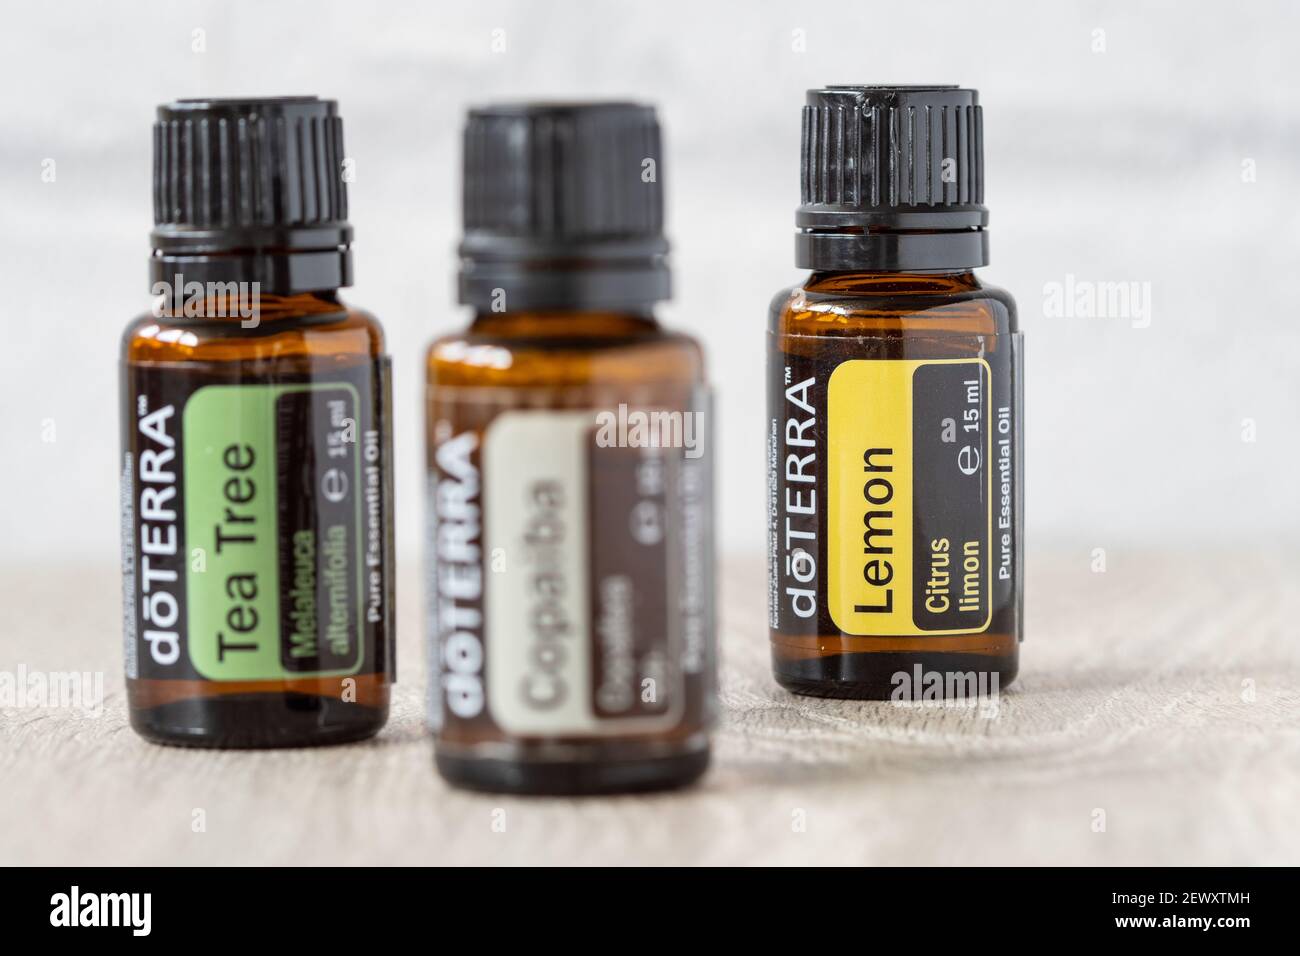 Pecs, Hungray - Febr 27 2021 - Illustrative editorial image of Doterra Essential Oils for everyday use Stock Photo